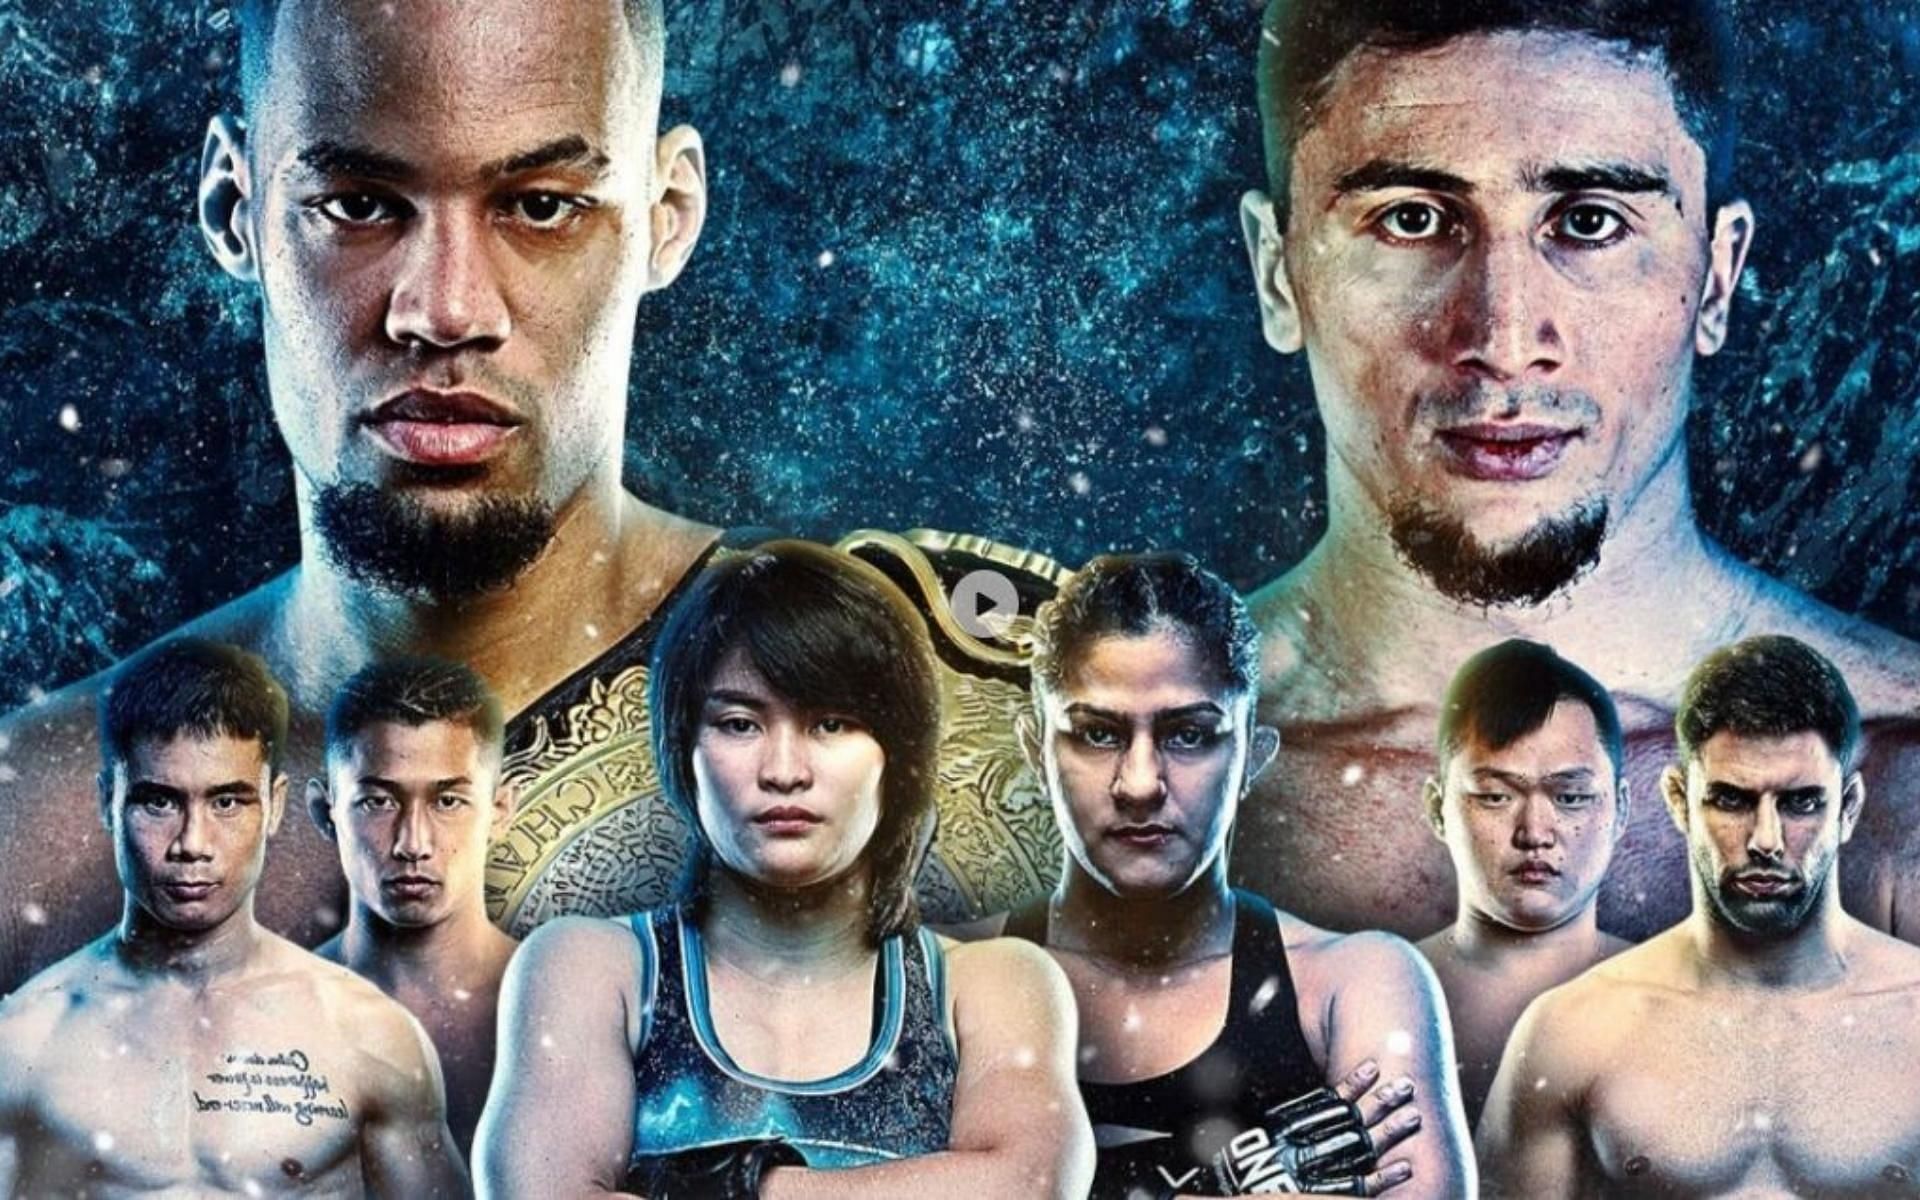 ONE Championship: Winter Warriors happens this December 3. (Image courtesy of ONE Championship)